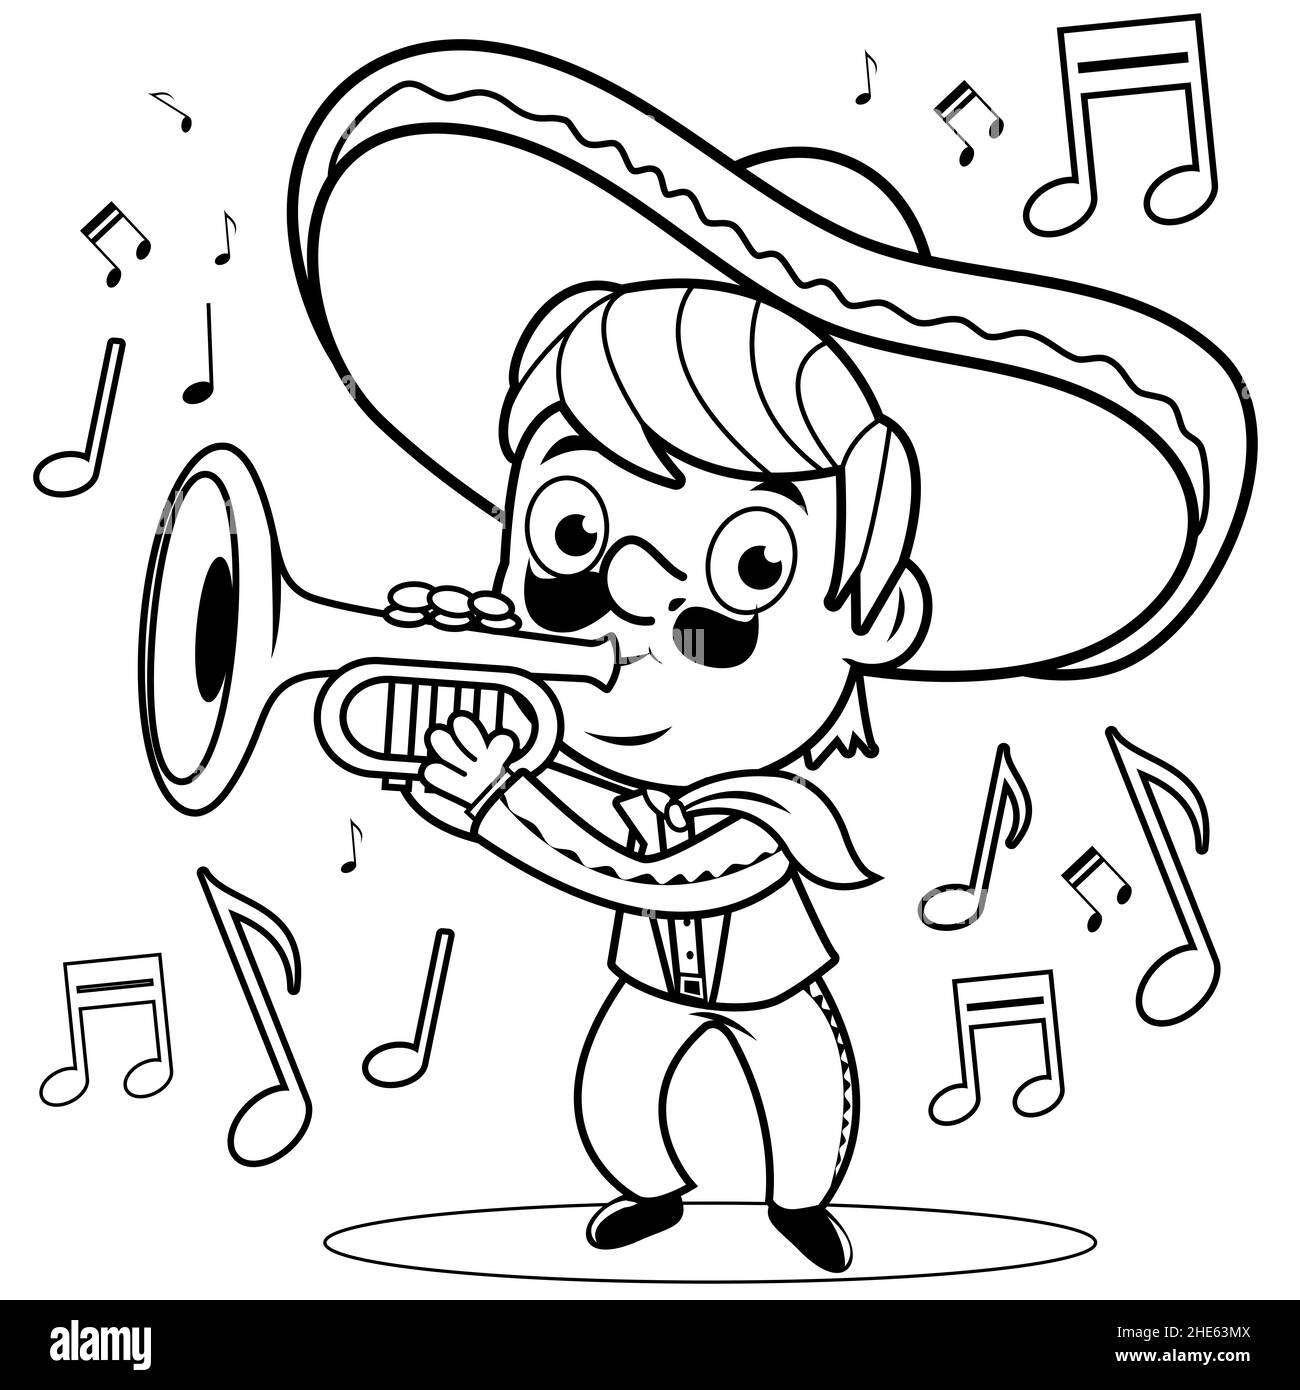 Trumpet drawing black and white stock photos images